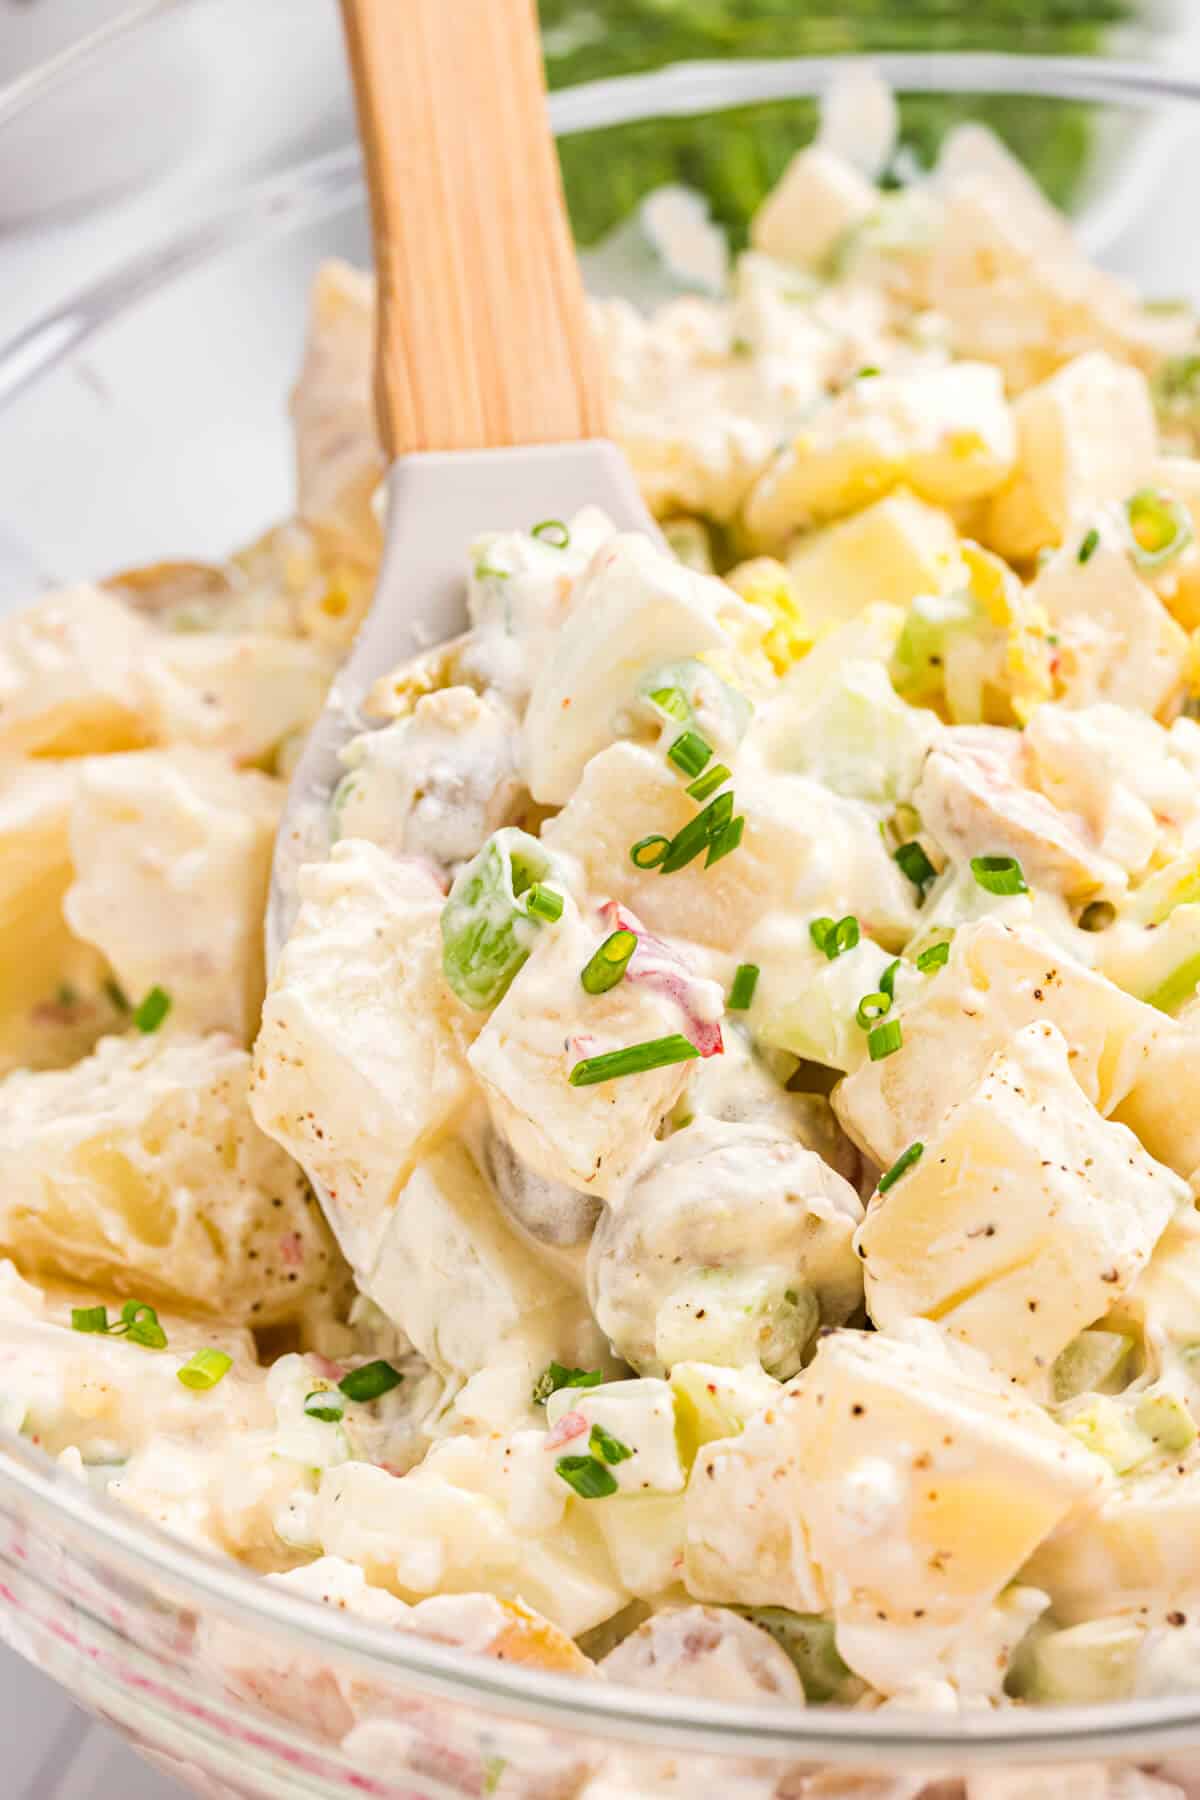 A bowl of cheese potato salad with a wooden spoon.